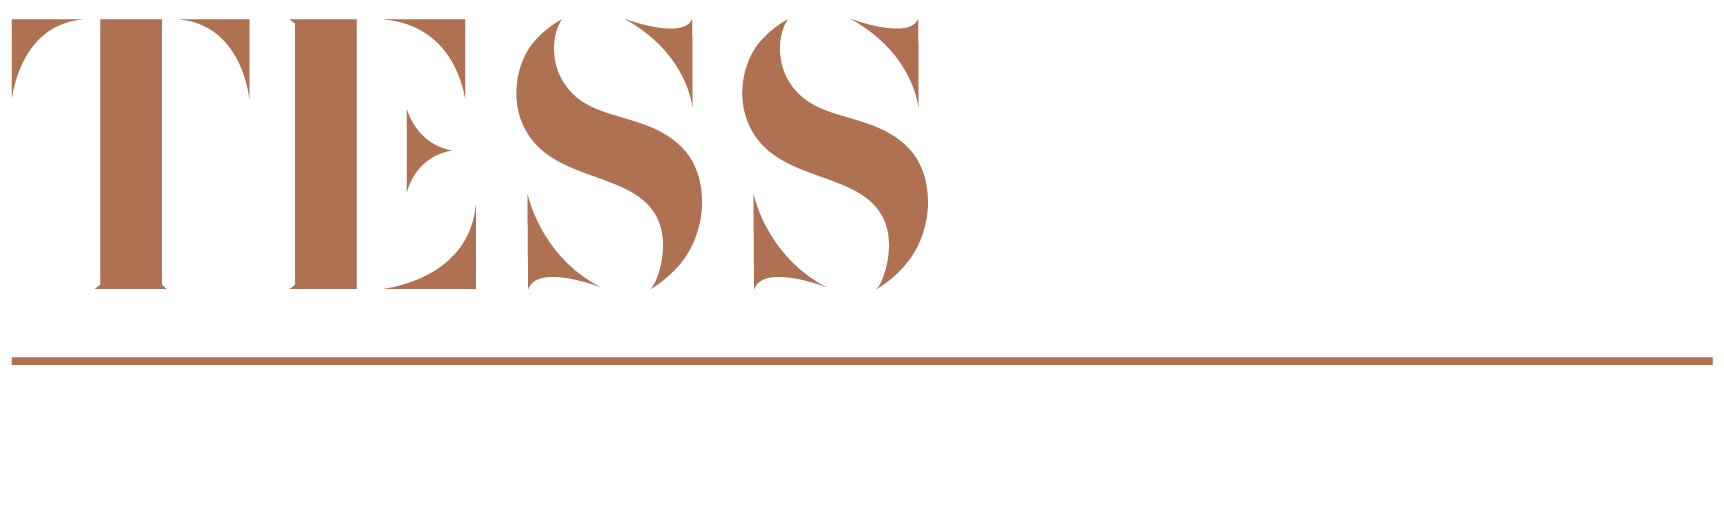 TESS Search Partners